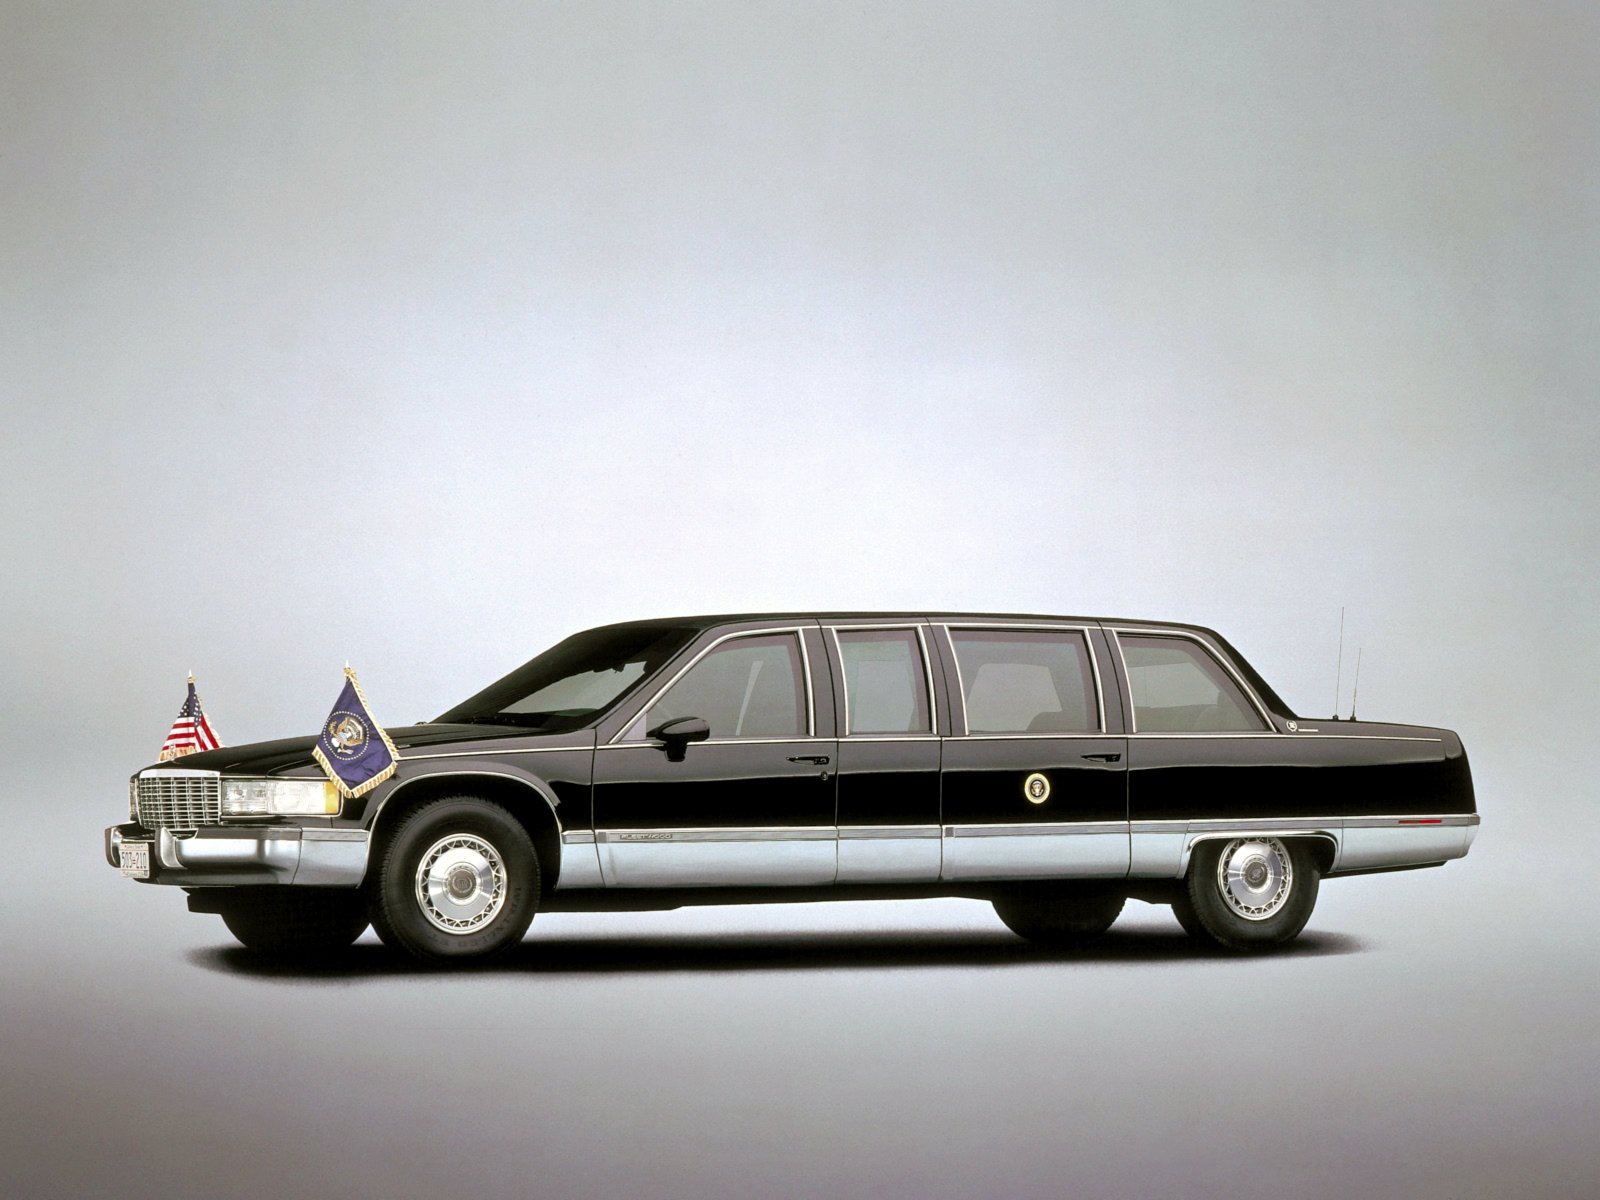 1993, Cadillac, Fleetwood, Brougham, Presidential, Limosuine, Armored, Luxury Wallpaper